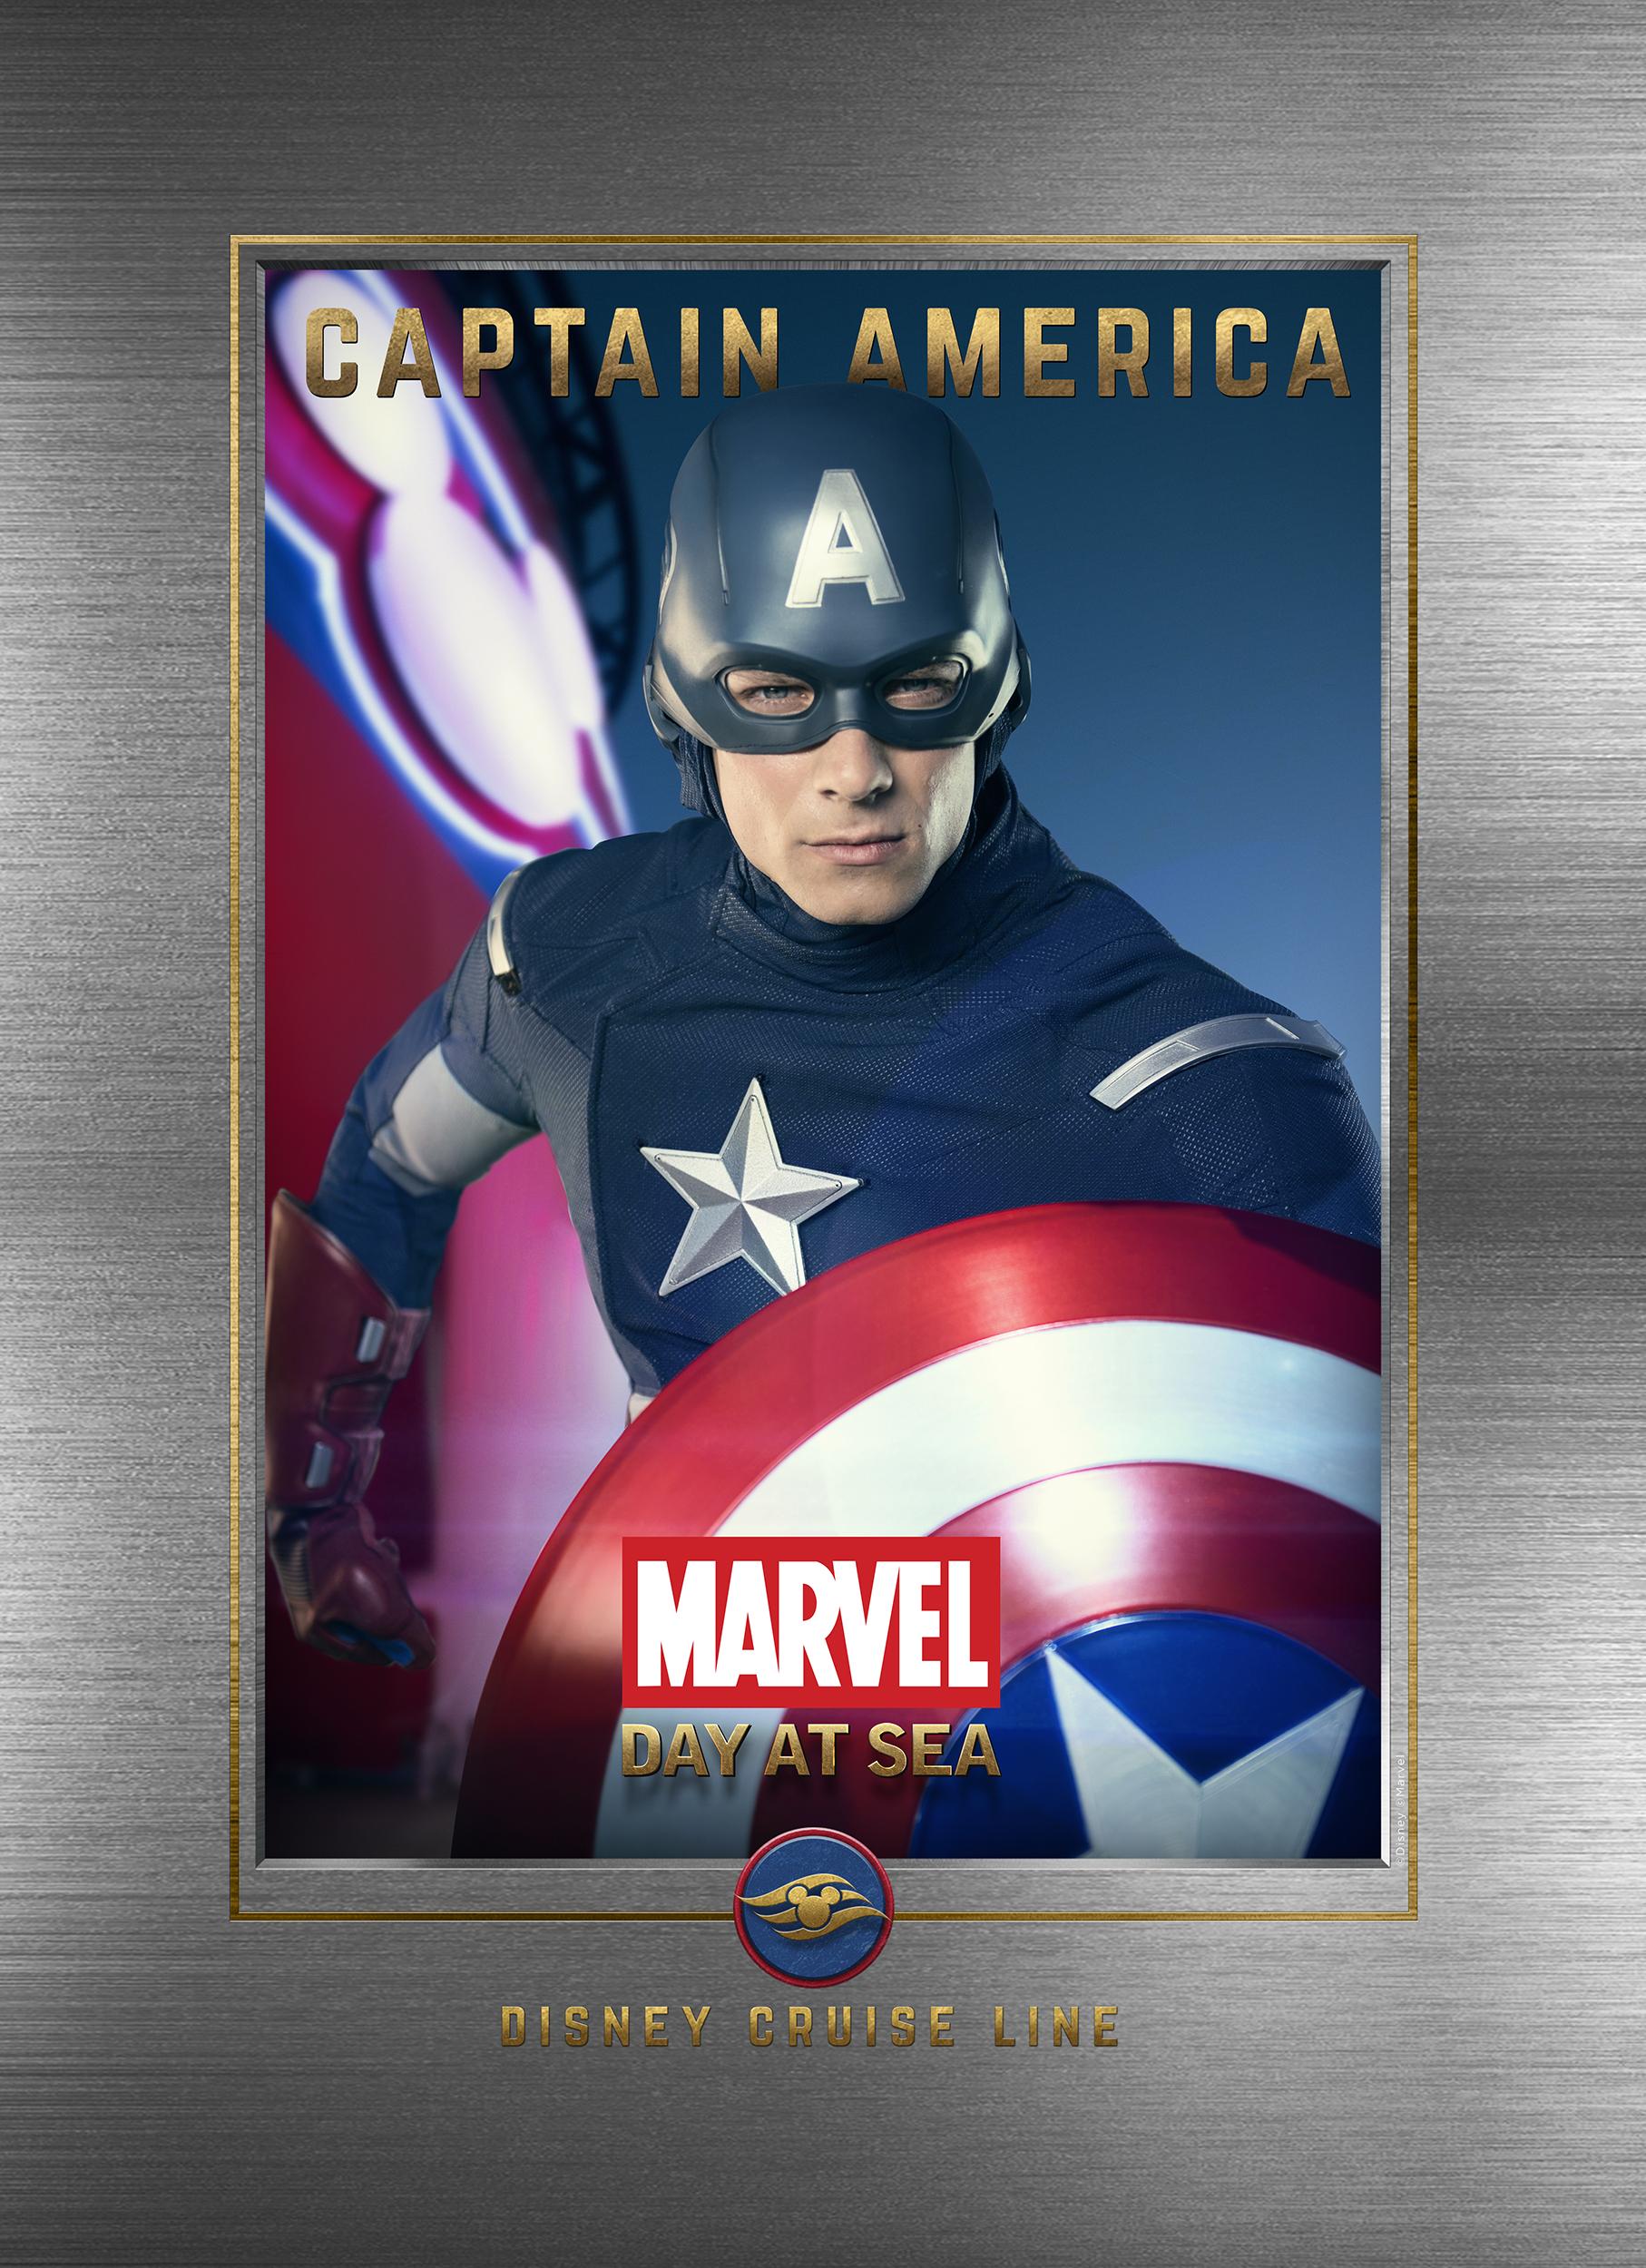 Disney Parks Blog Releases Mobile Wallpaper Featuring Marvel Day at Sea Heroes • The Disney Cruise Line Blog